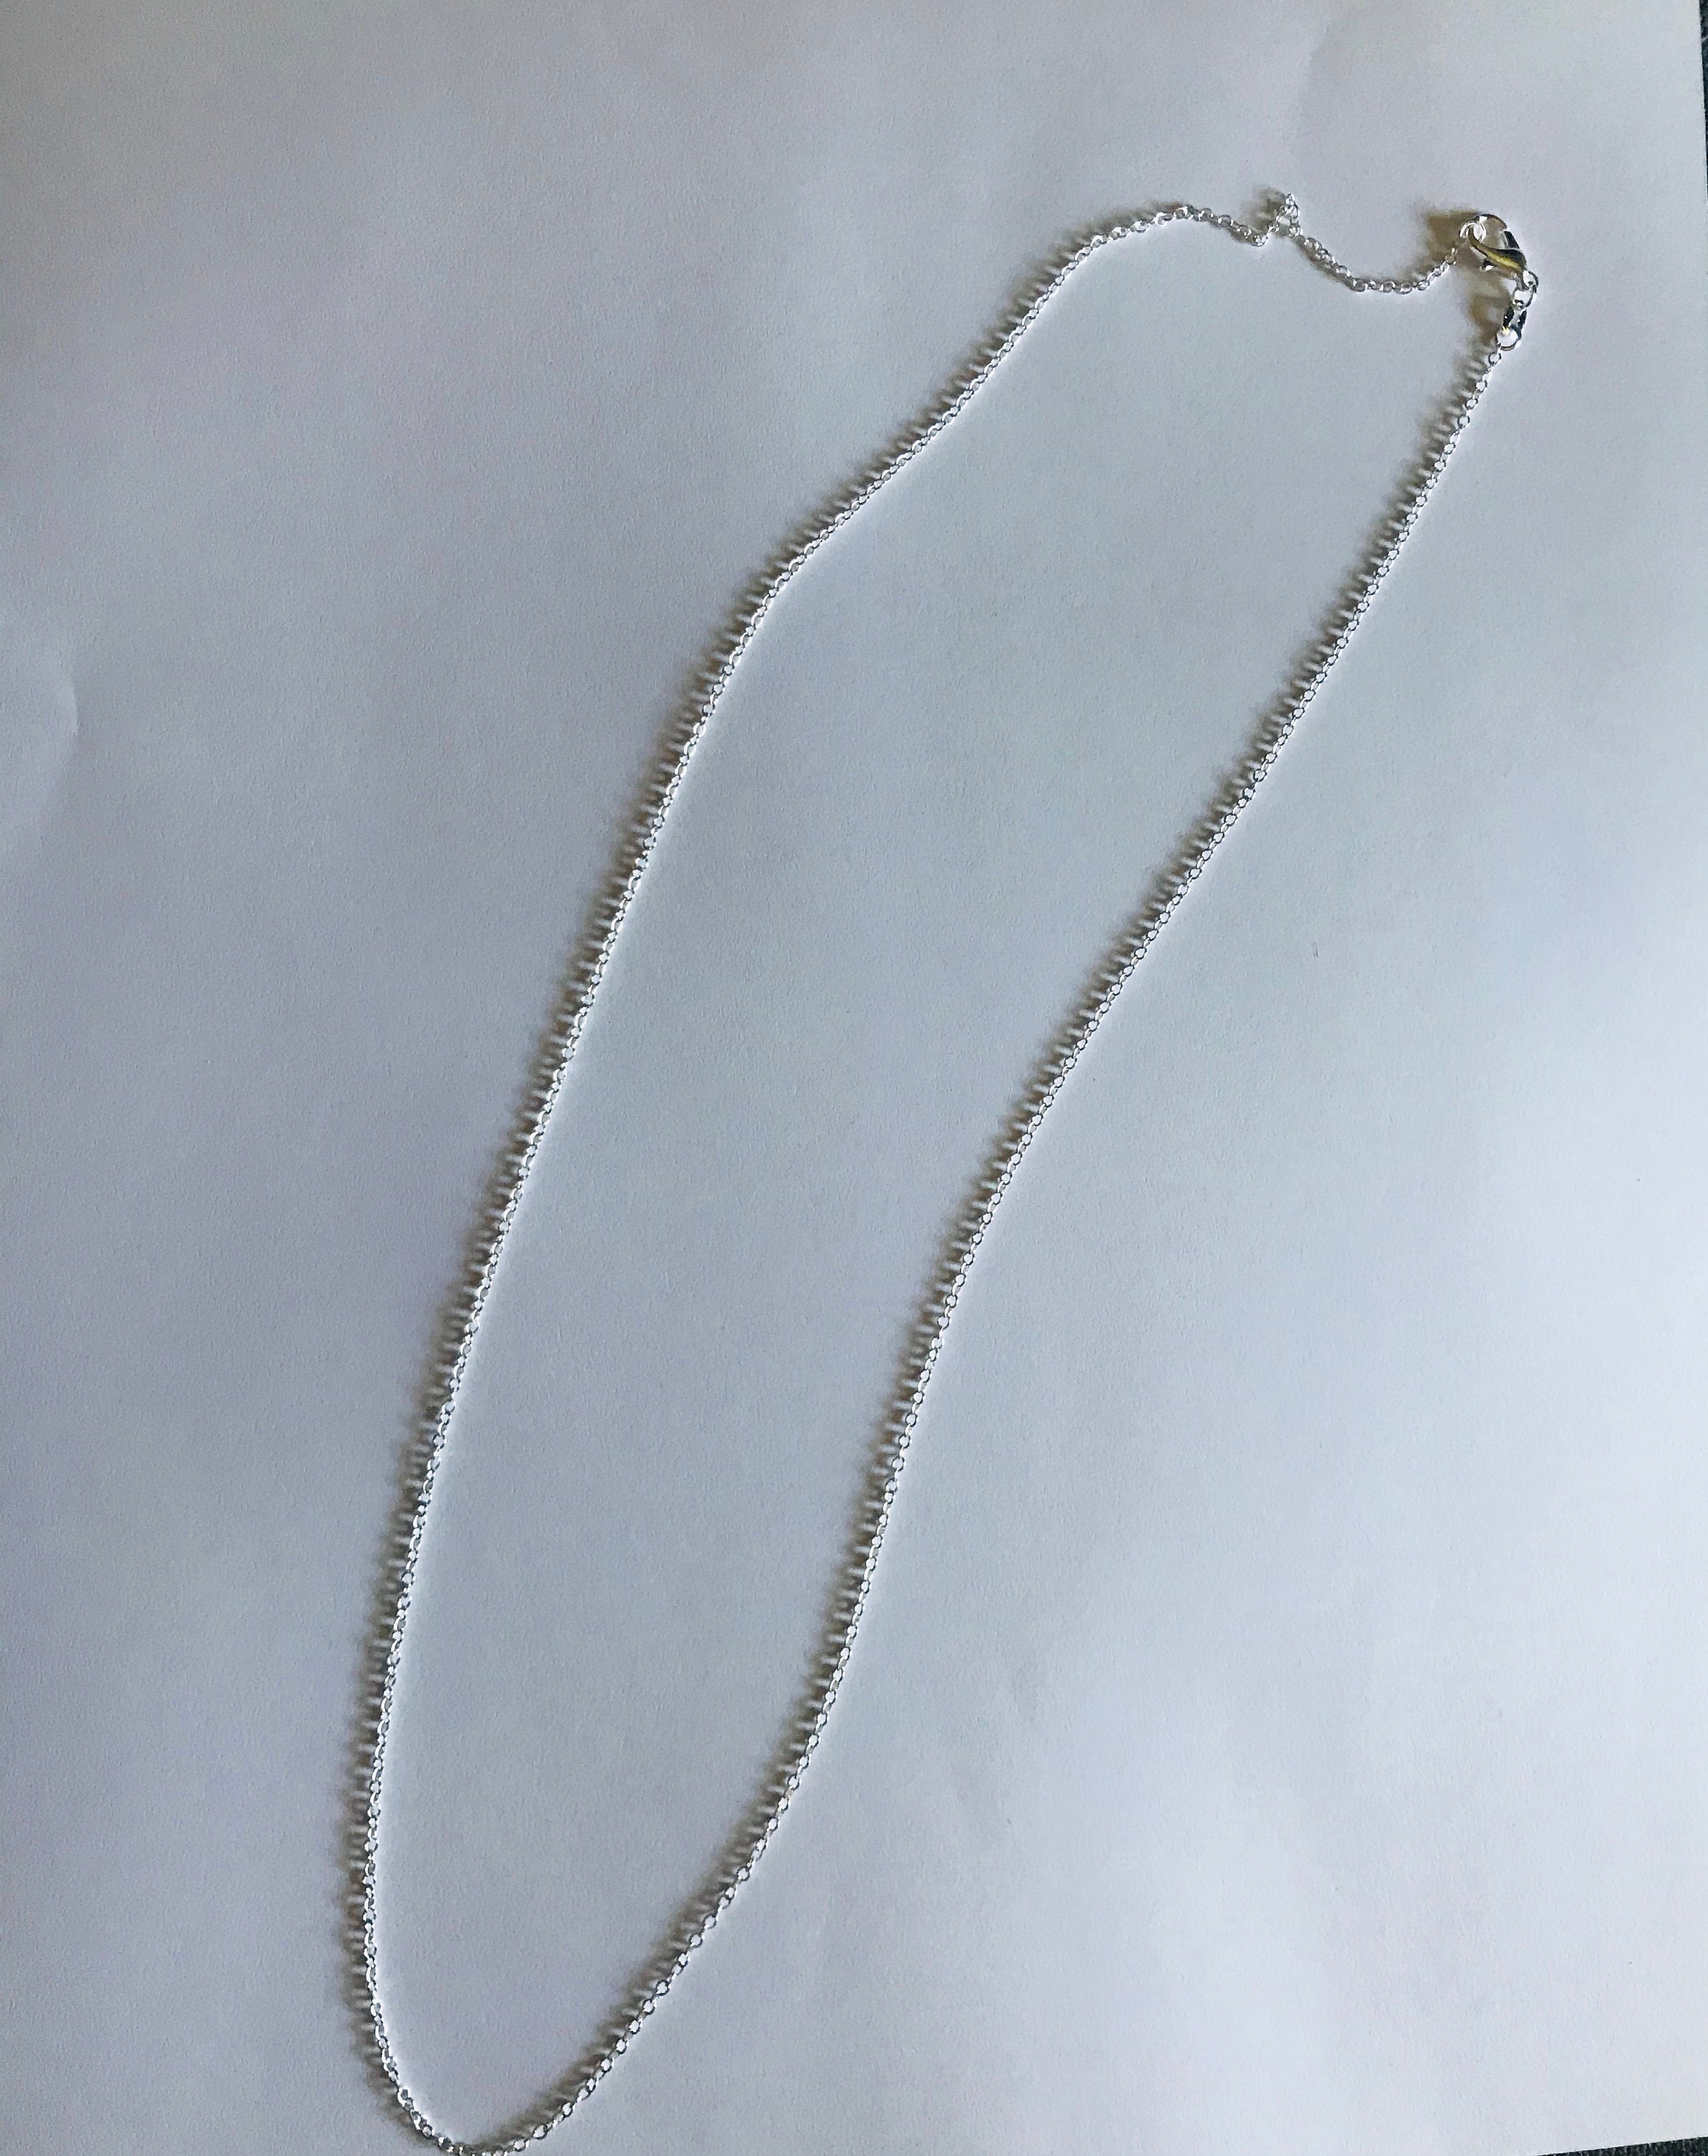 Silver Necklace Chain 24 Inches | Etsy